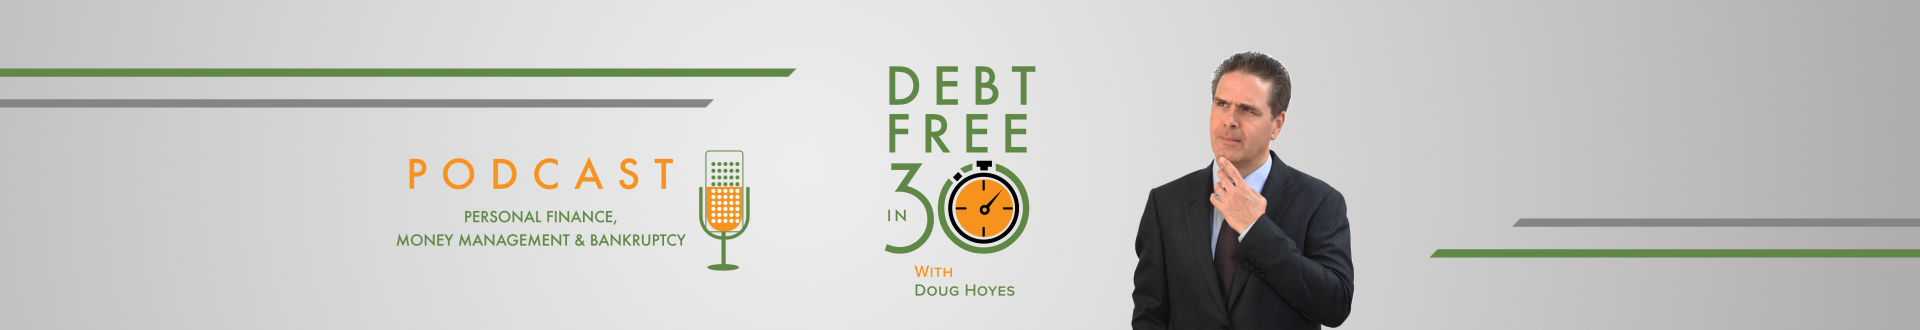 Debt Free in 30 Podcast Archive - Page 38